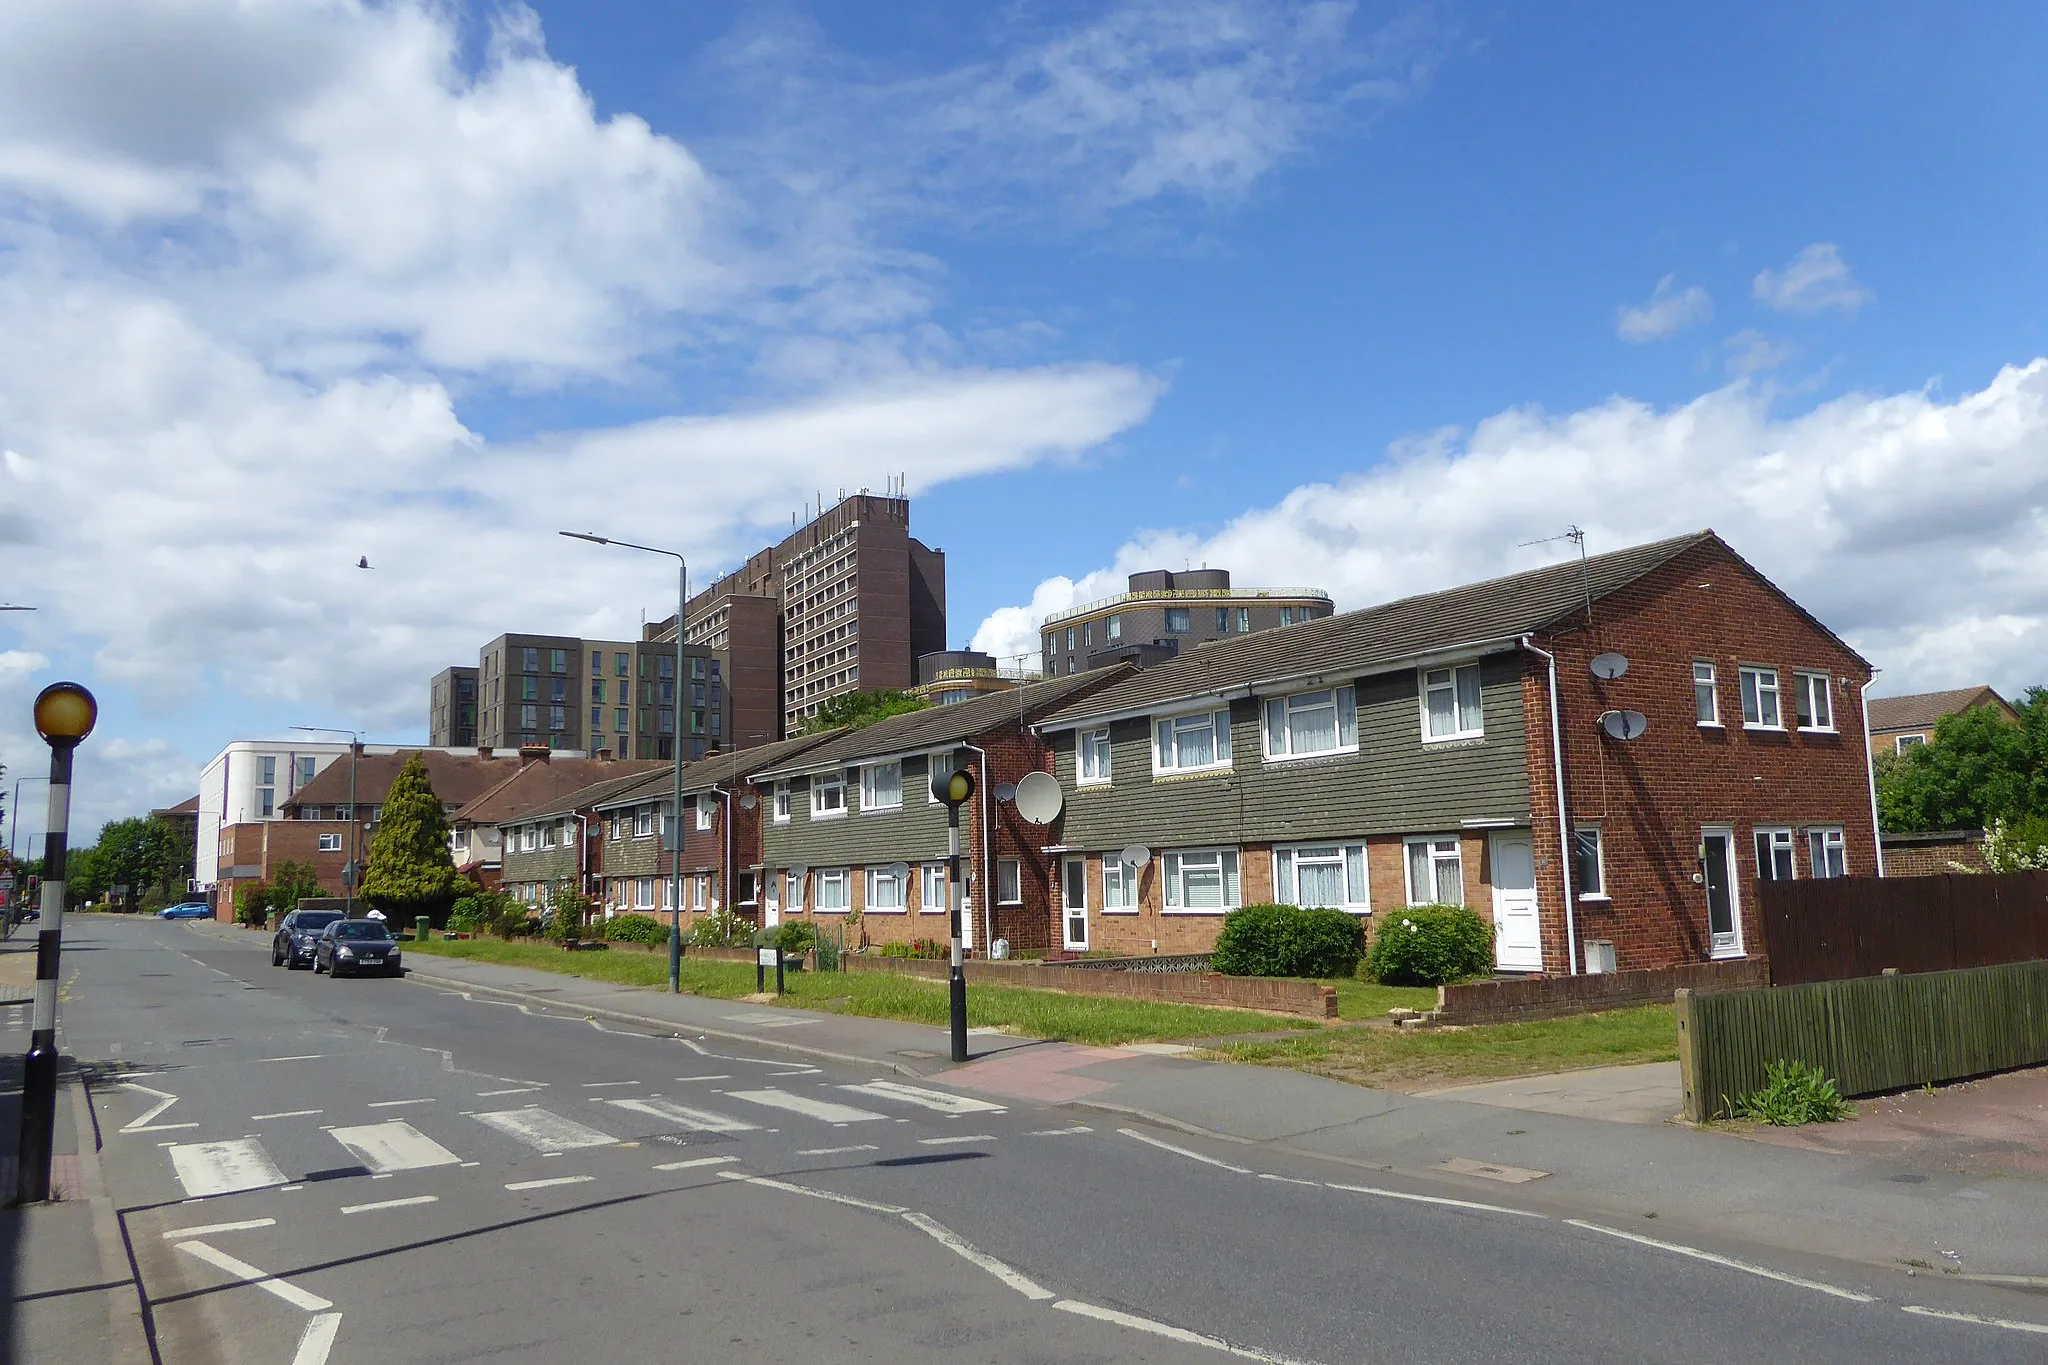 Photo showing: The northwest facing view along Faraday Avenue in Sidcup, London Borough of Bexley.